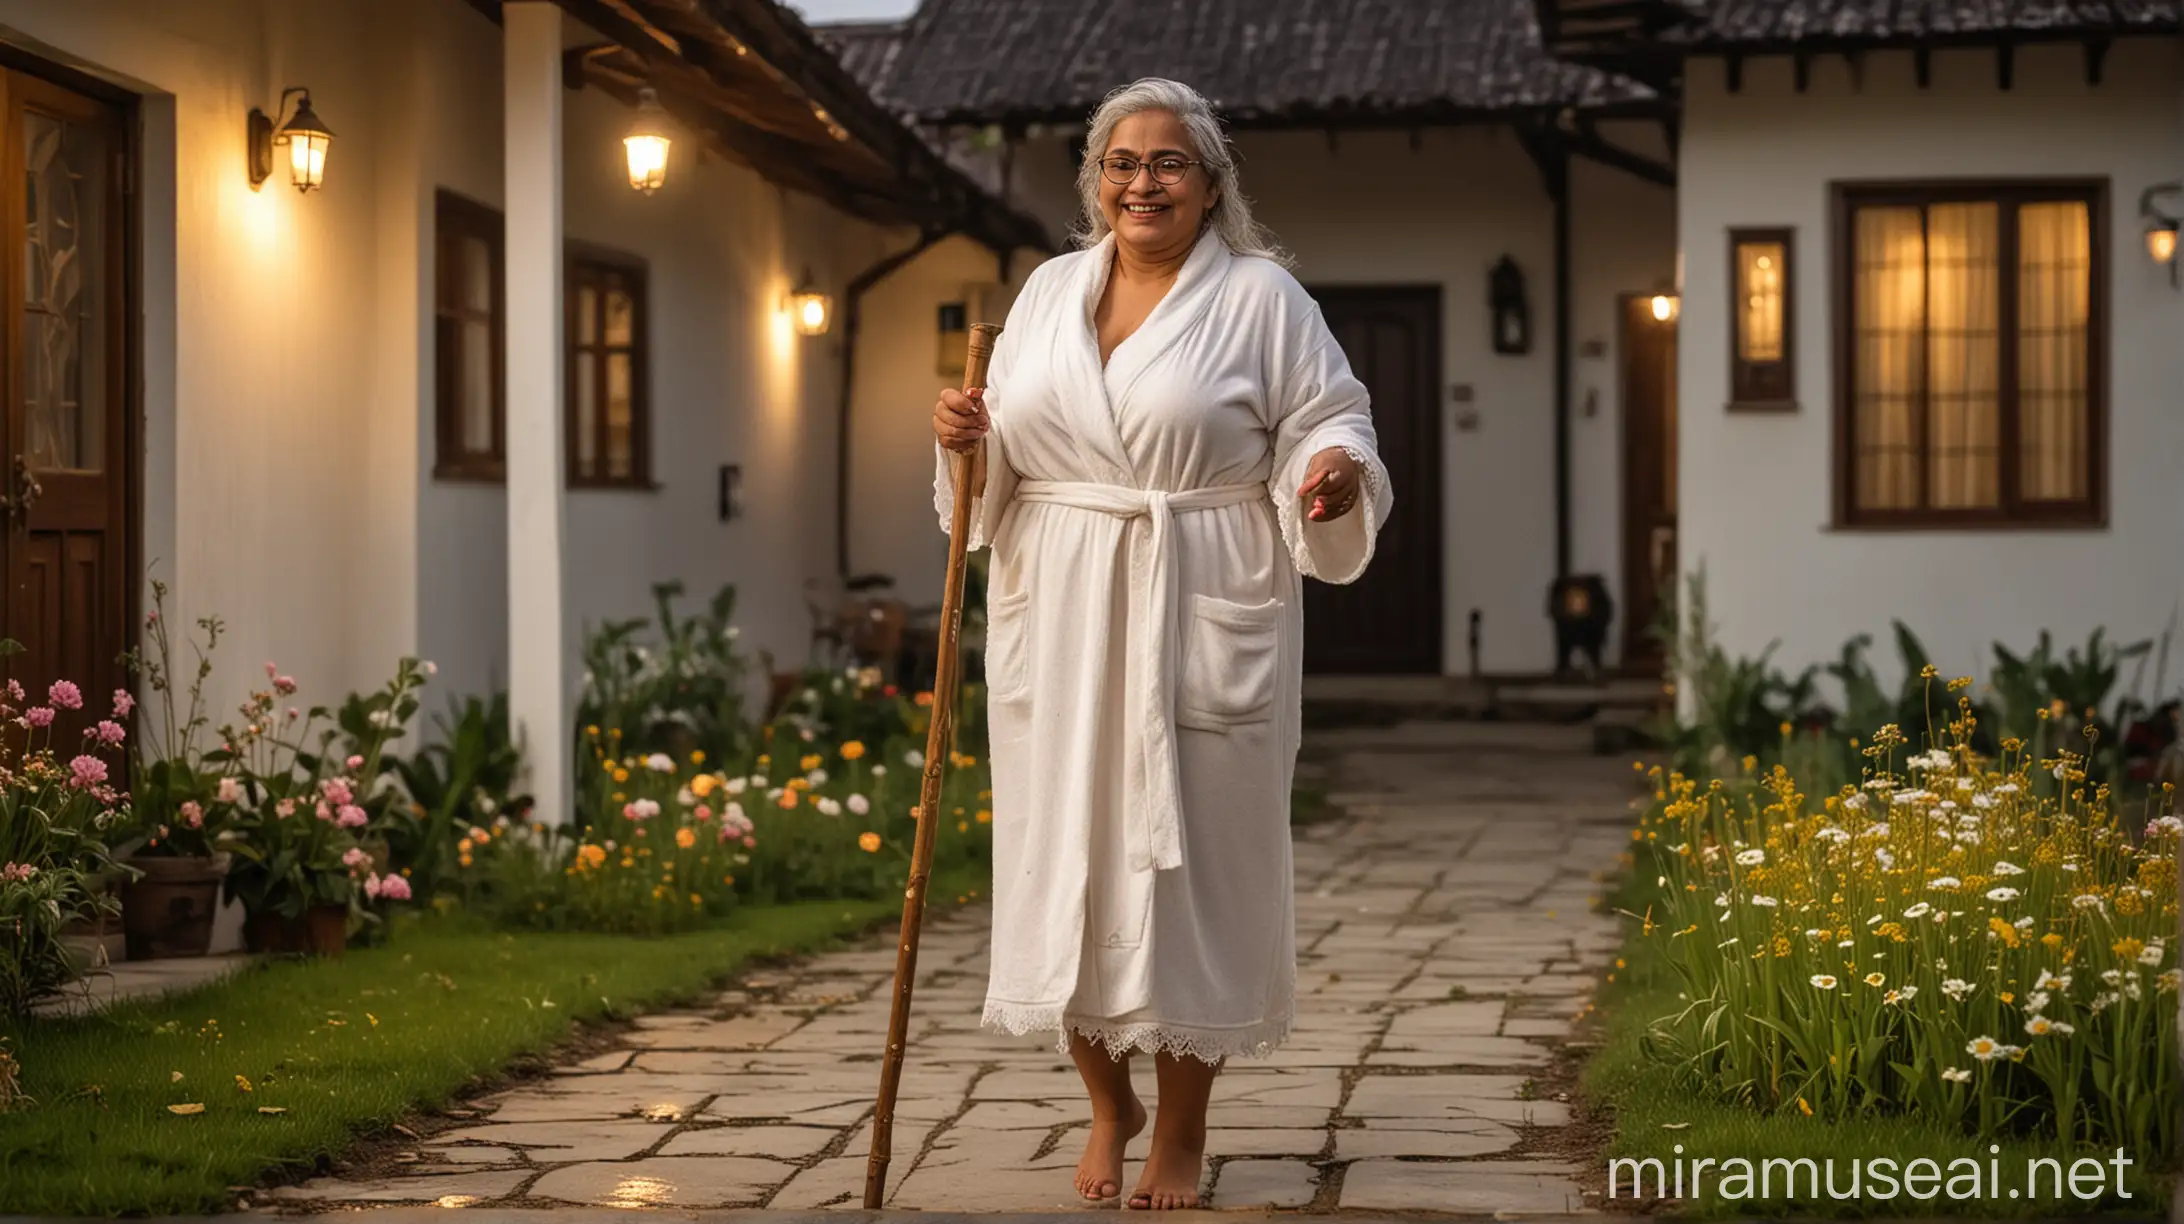 sweet faced old desi  very curvy  fat   woman  with big breasts with tick hair binding on head and big belly walking with one  wooden walking stick wearing   only a white bath robe  on her body  and a golden neck lace and a spectacles. she is happy and laughing . she is  walking with her dog  . its night  time and in background there is a luxurious farm house  with bulb light and luxurious house   with flowers and grass and concrete floor and it is raining . she is wearing heels on feet.